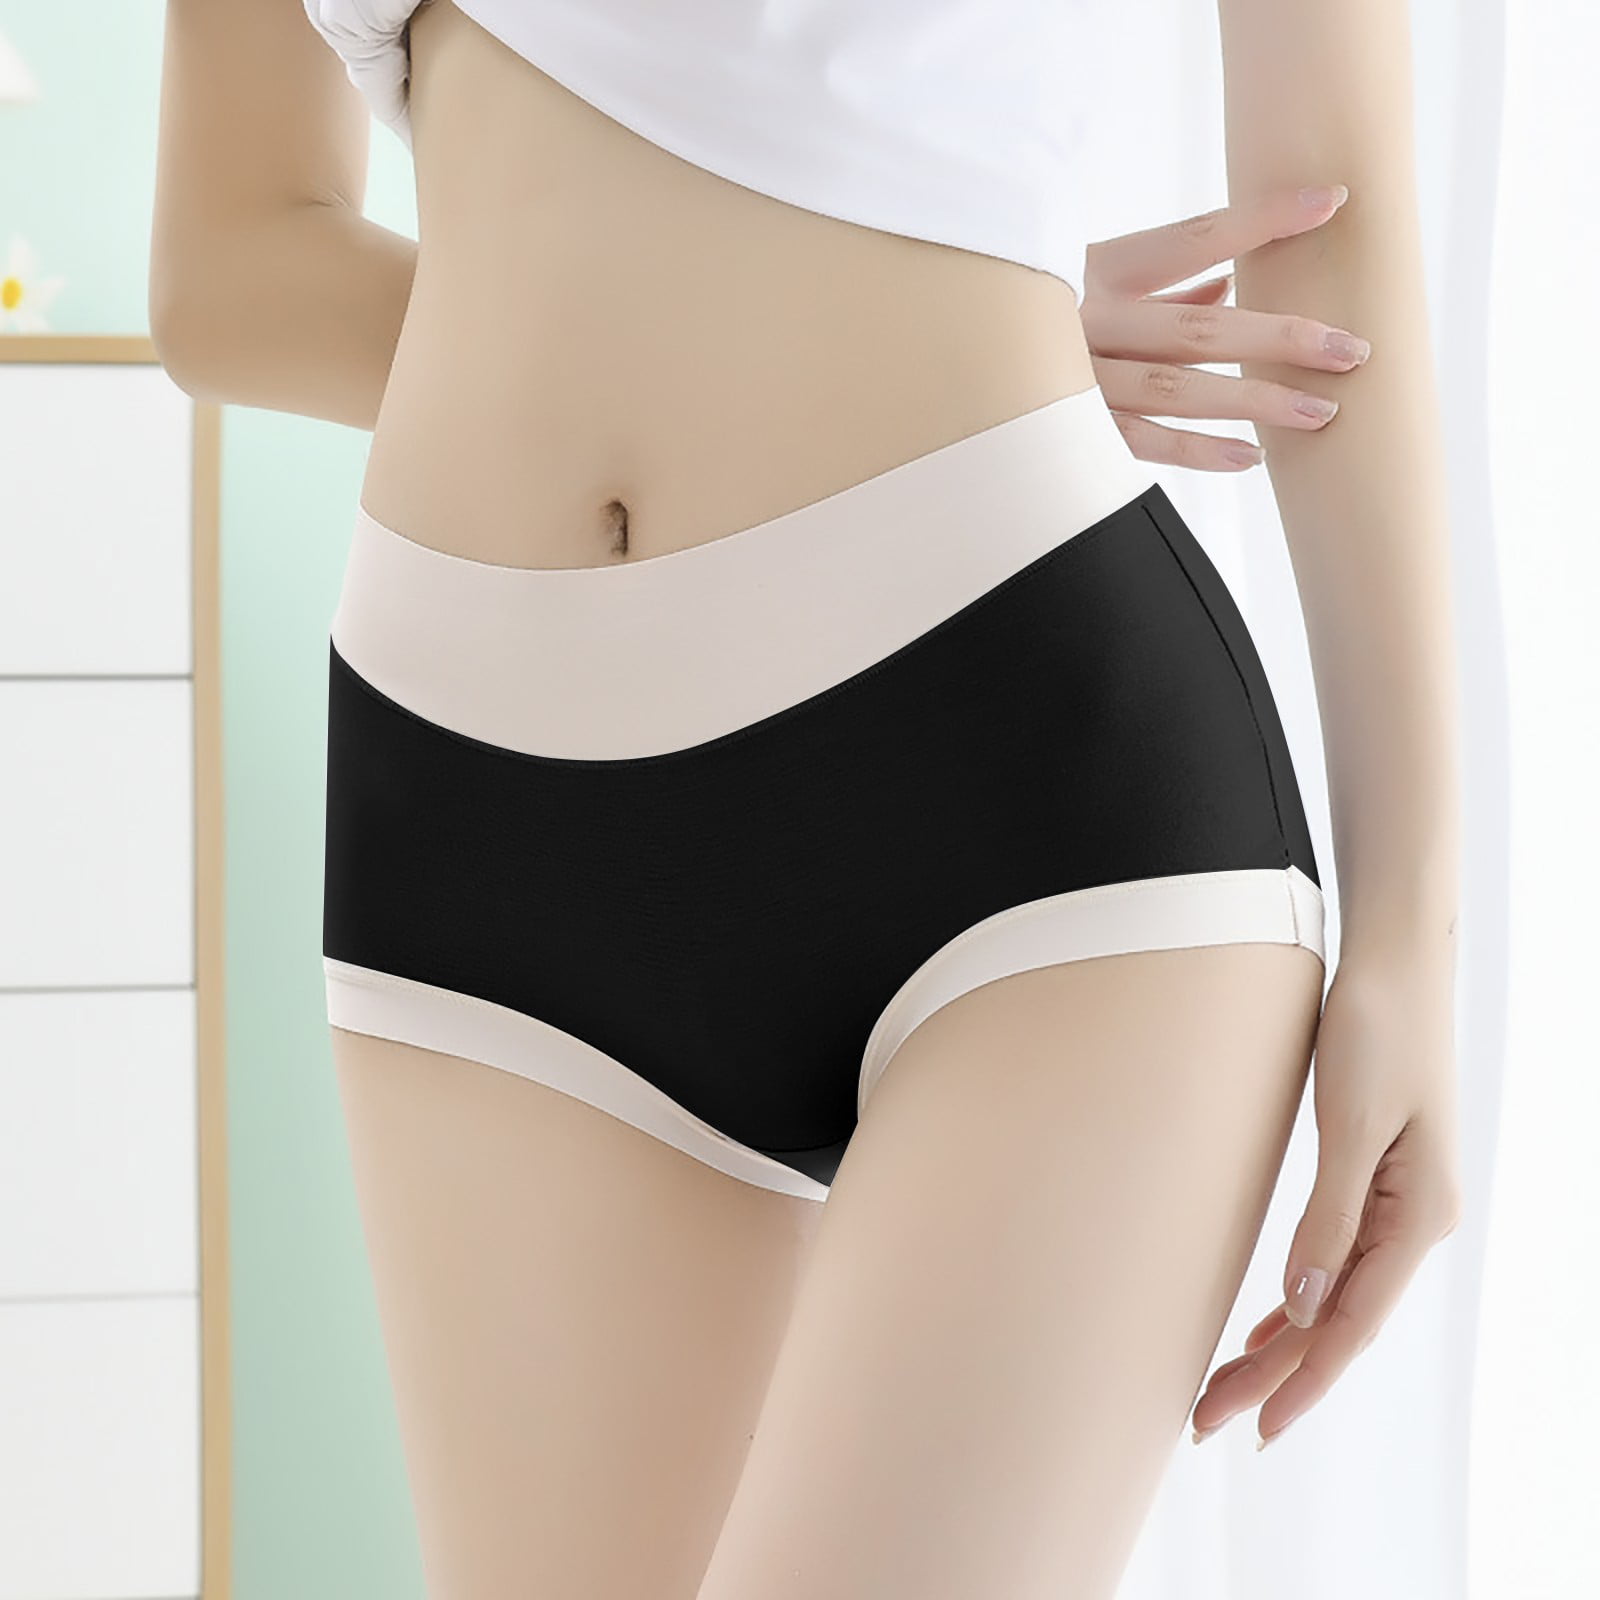 Buy infloura Plus Size Cotton Panties for Women, High Waist Panty with  Full Coverage, Small to 10XL Size